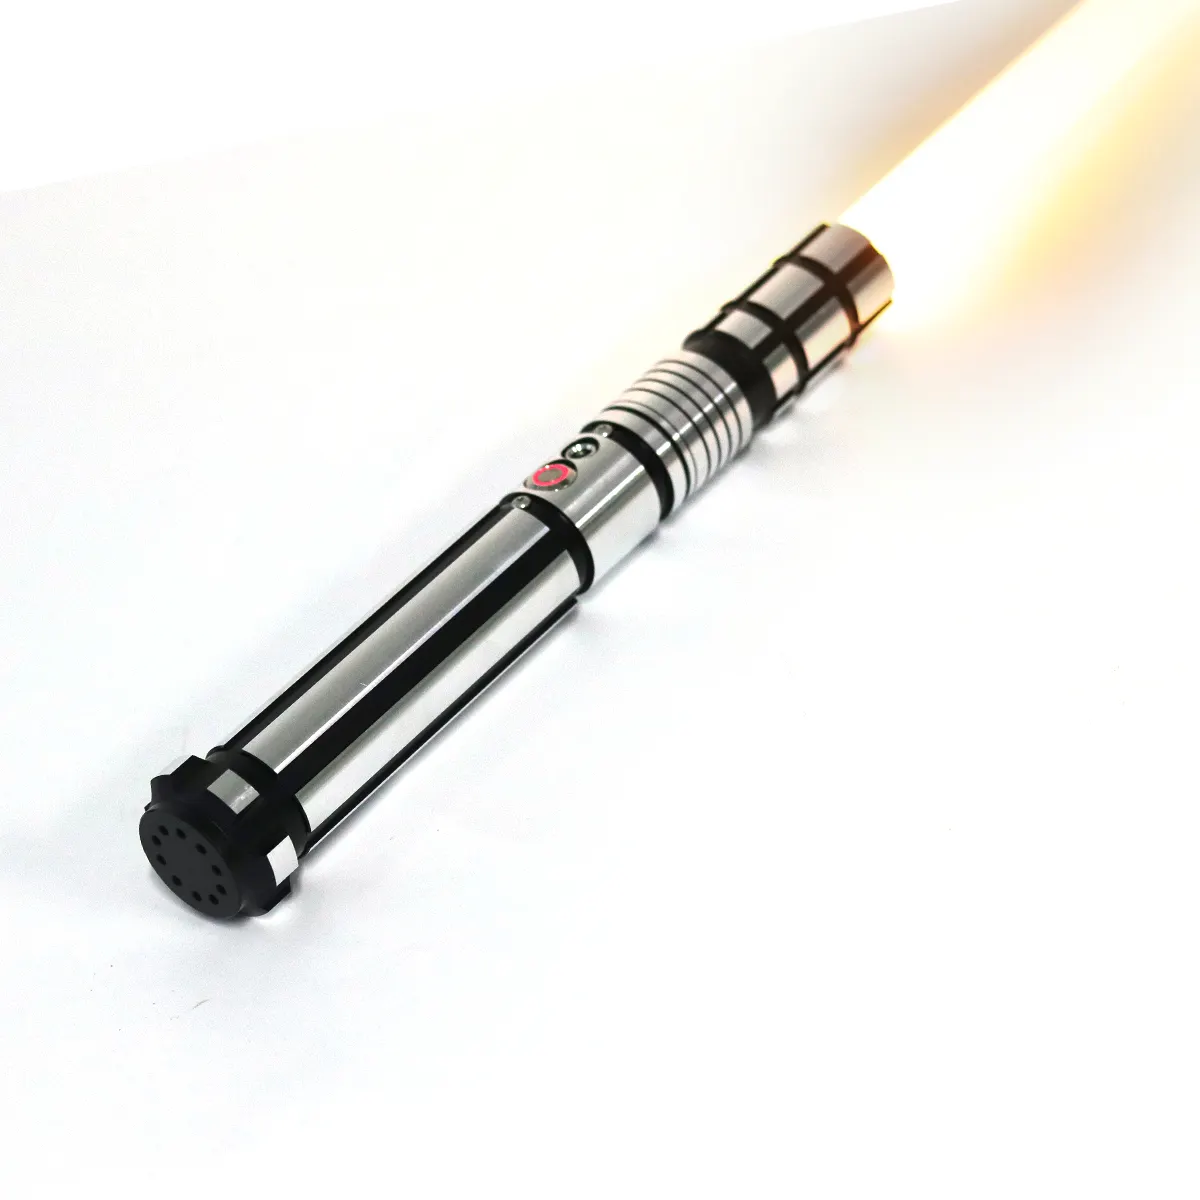 LGT SABERSTUDIO metal hilt heavy dueling blade infinite color changing neo pixel lightsaber with smooth swing for star the wars